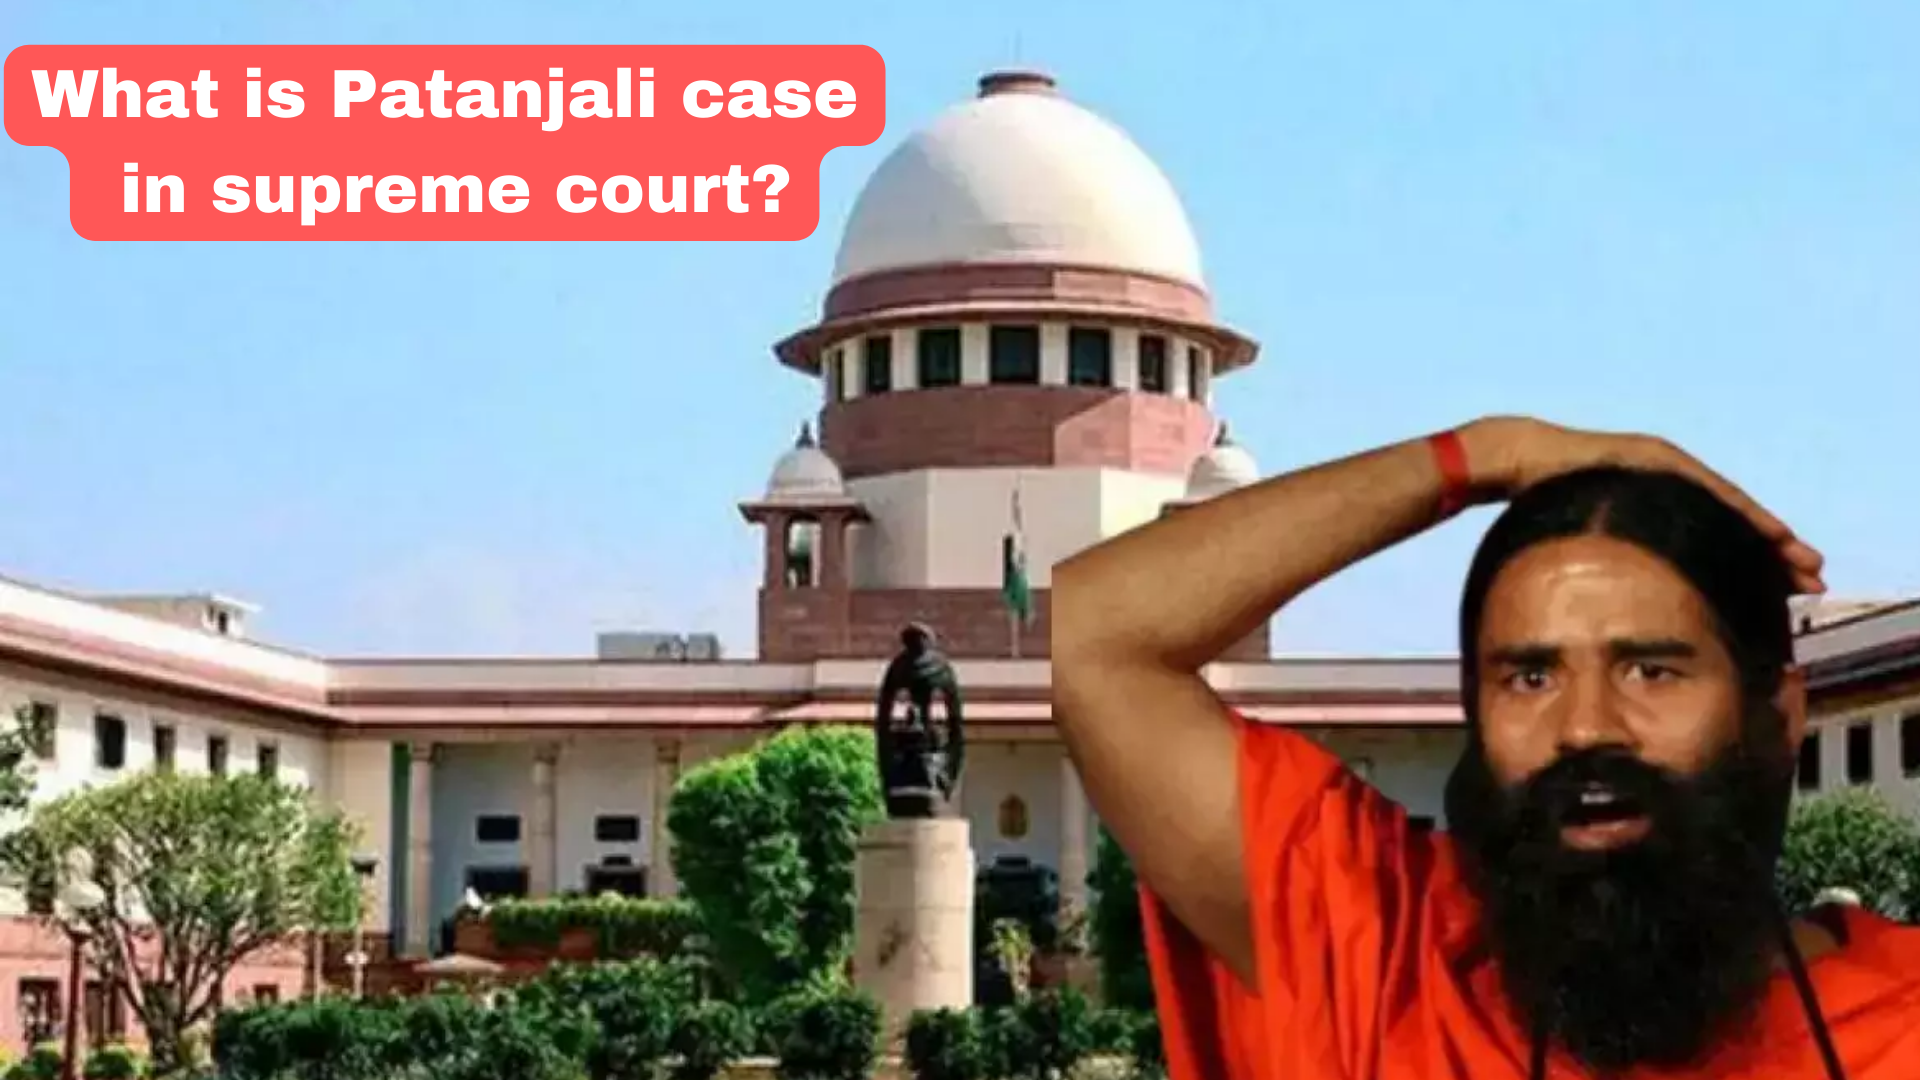 What is Patanjali case in supreme court? The recent developments in the contempt case against Patanjali founders Ramdev and Balkrishna have brought to light a concerning issue of misleading advertisements claiming to cure incurable diseases